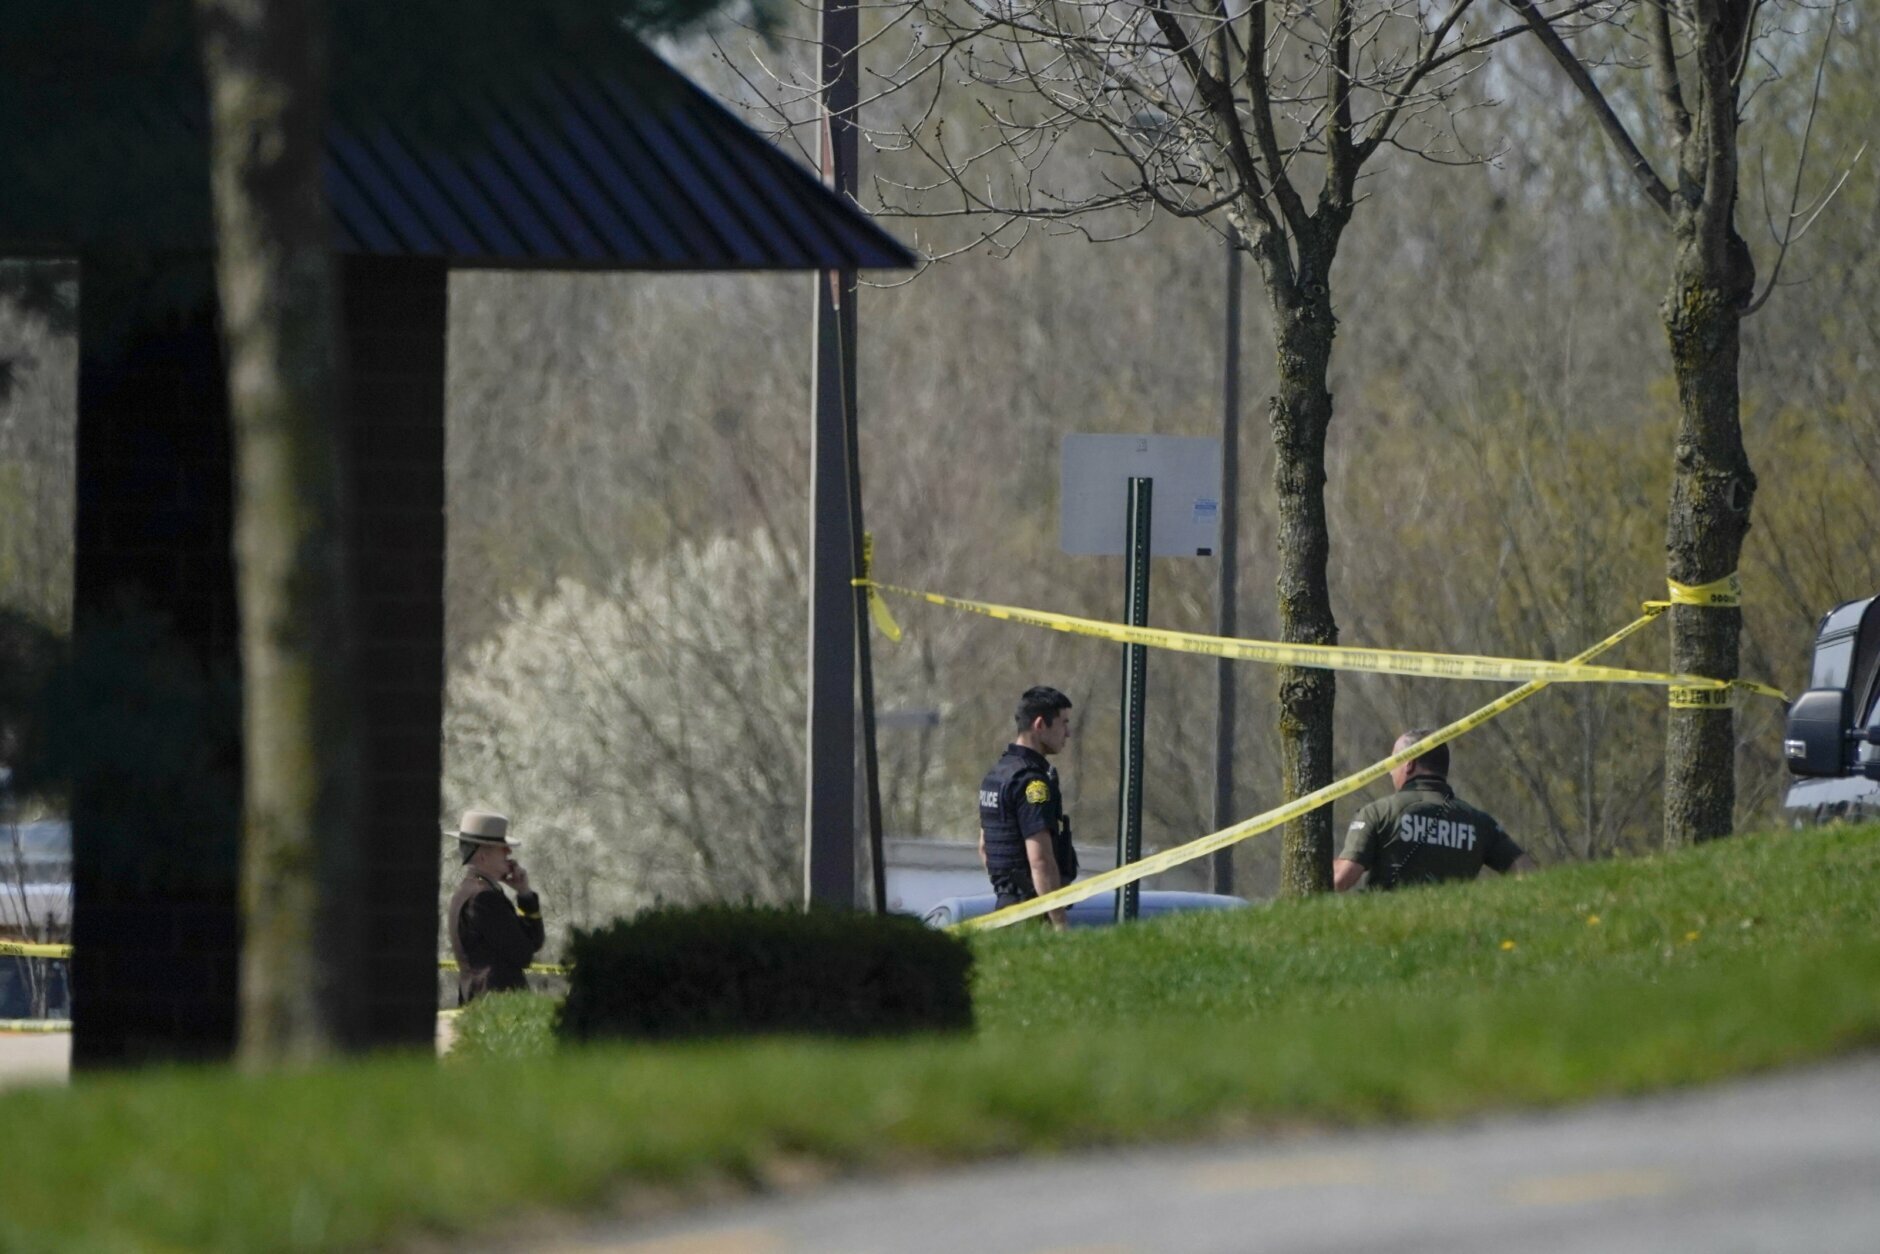 Police stand around an area cordoned off by police tape on Progress Court, near the scene of a shooting at a business park, in Frederick, Md., Tuesday, April 6, 2021. (AP Photo/Julio Cortez)